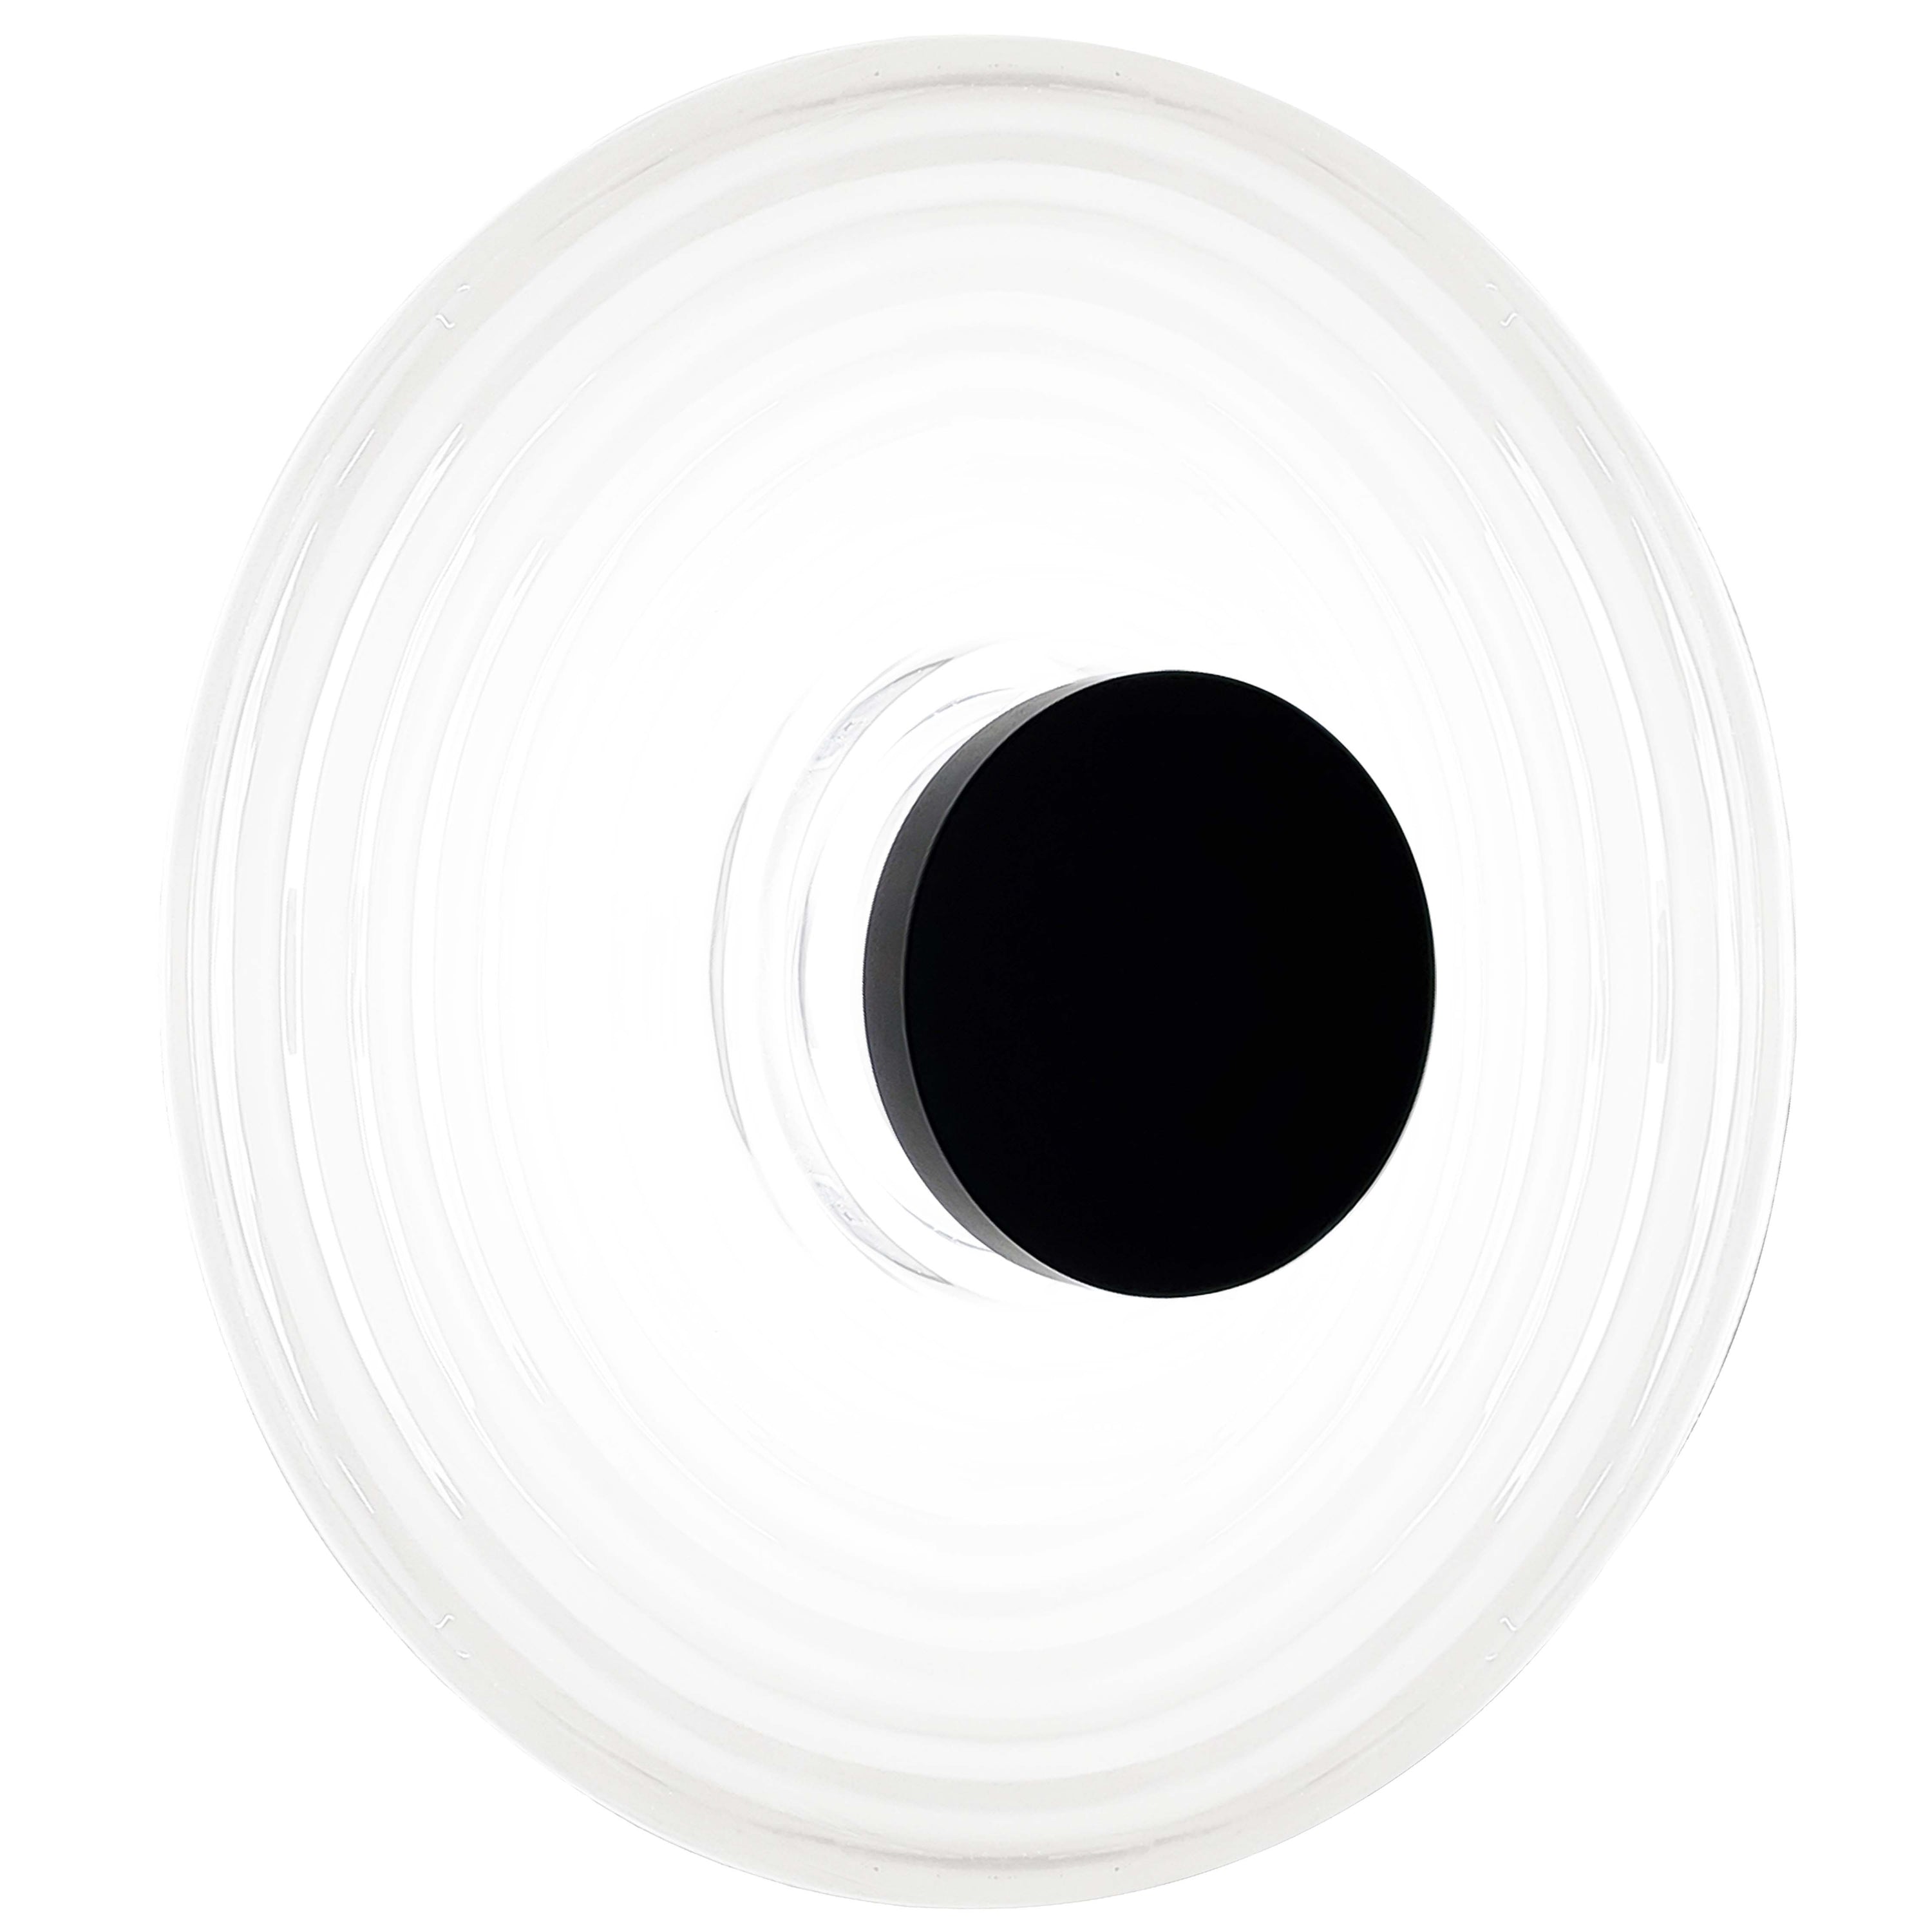 Dainolite WFD-1812LEDW-MB-WH 12W Wall Sconce Matte Black with White Rippled Glass